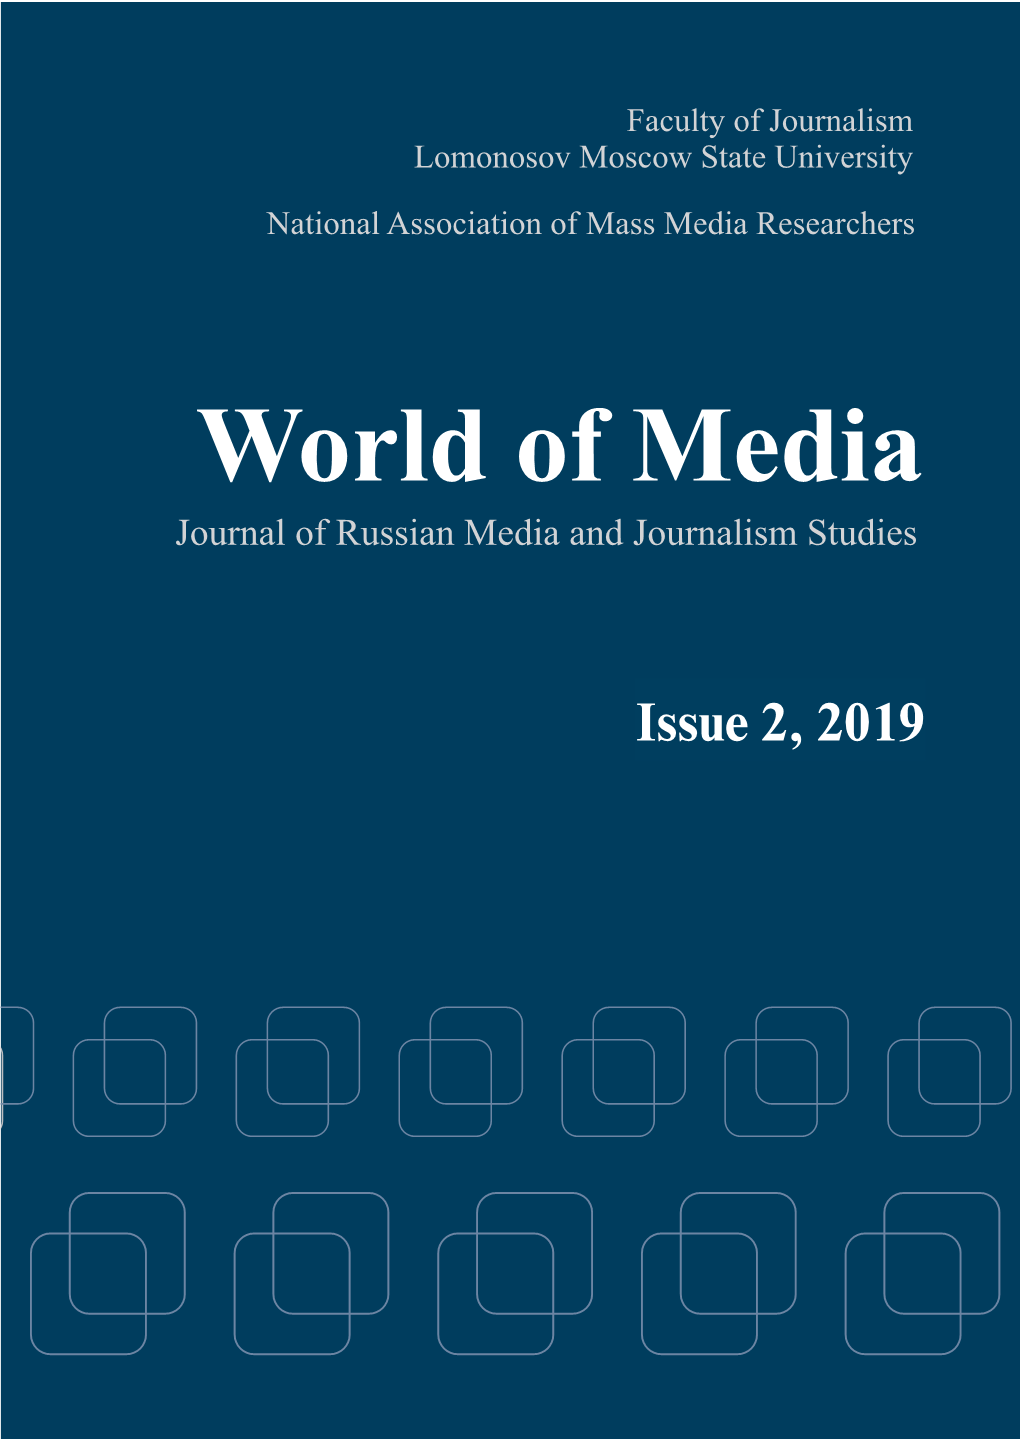 Issue 2, 2019 World of Media Journal of Russian Media and Journalism Studies Issue 2, 2019